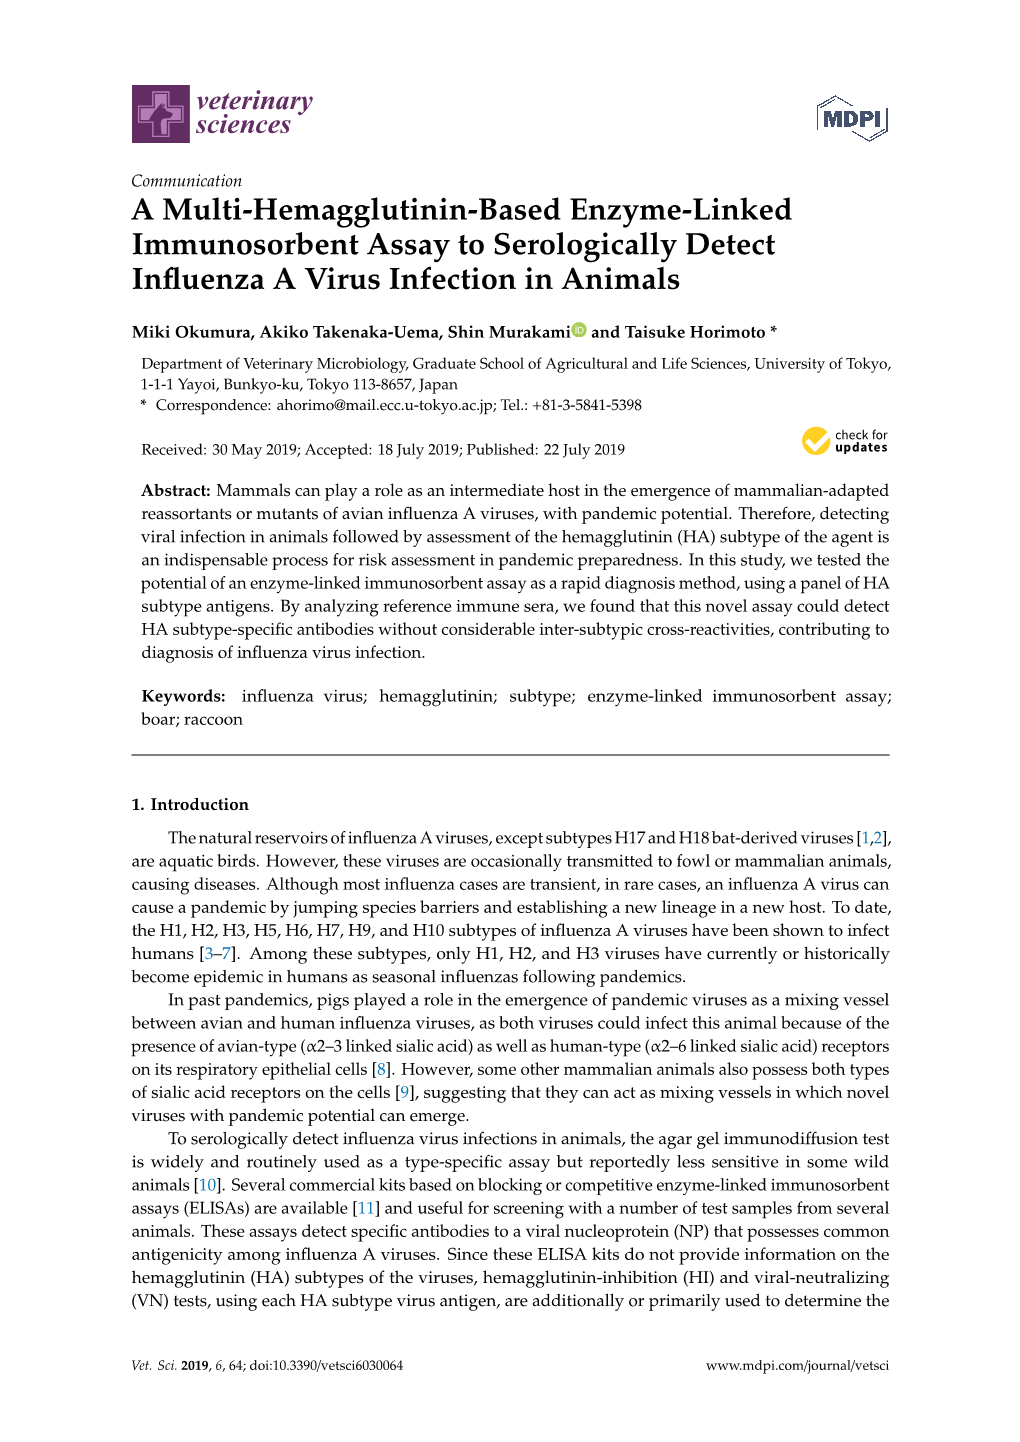 A Multi-Hemagglutinin-Based Enzyme-Linked Immunosorbent Assay to Serologically Detect Inﬂuenza a Virus Infection in Animals